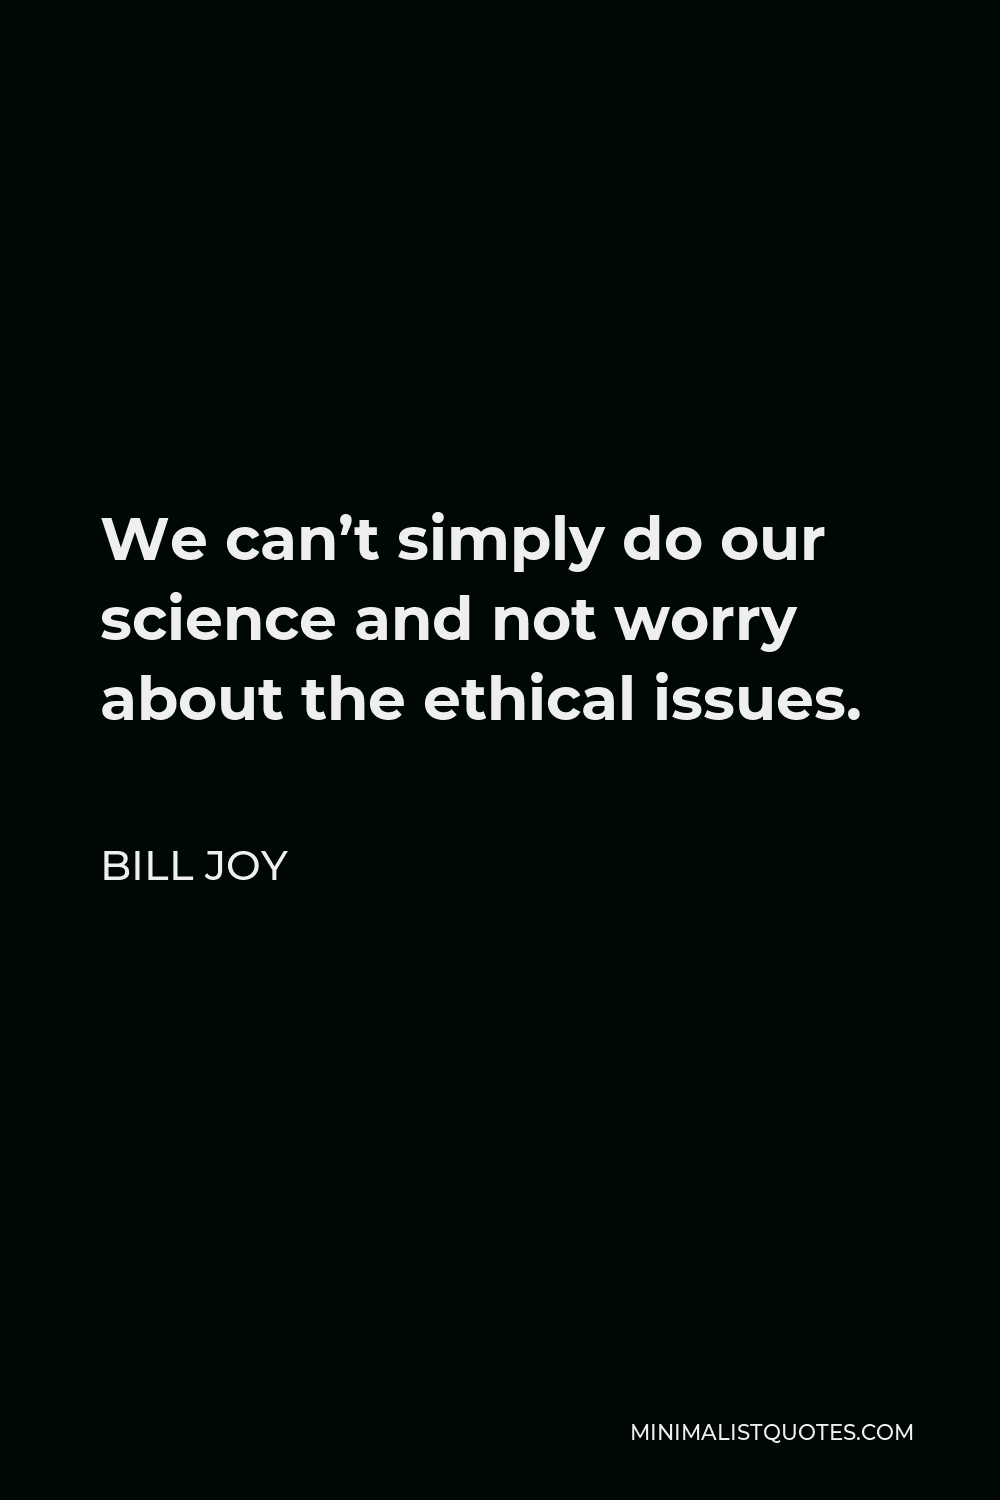 Bill Joy Quote - We can’t simply do our science and not worry about the ethical issues.